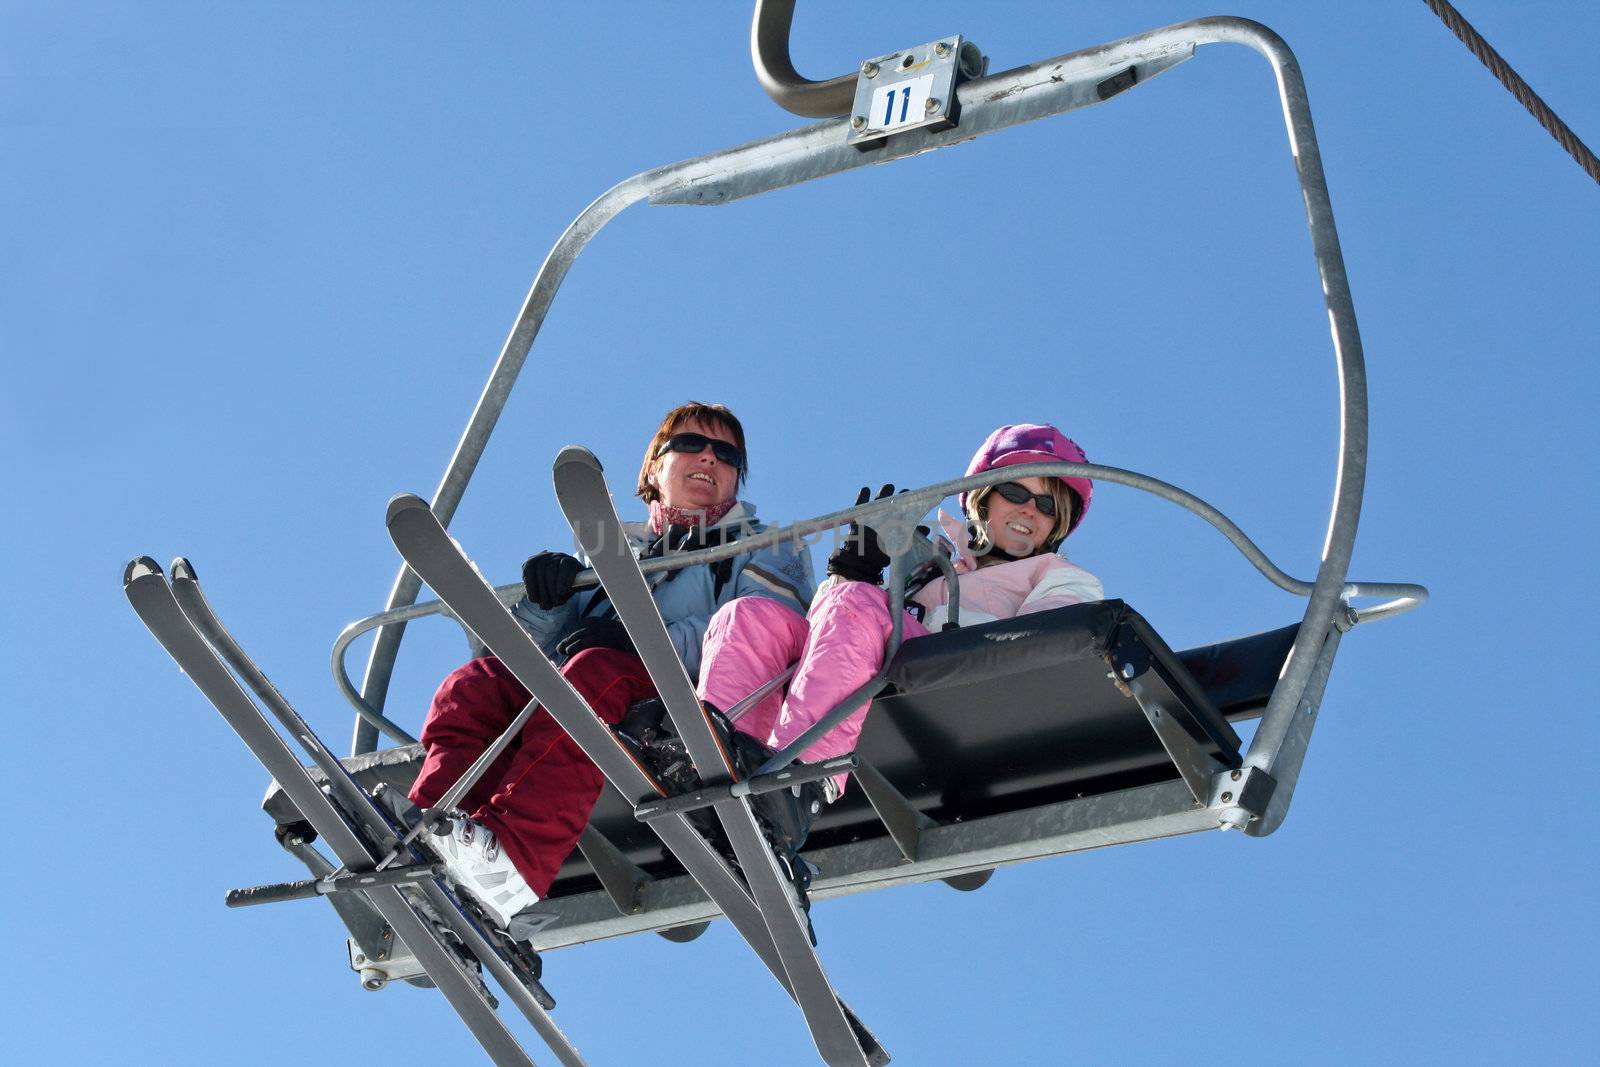 Two women fly high on the ski lift.